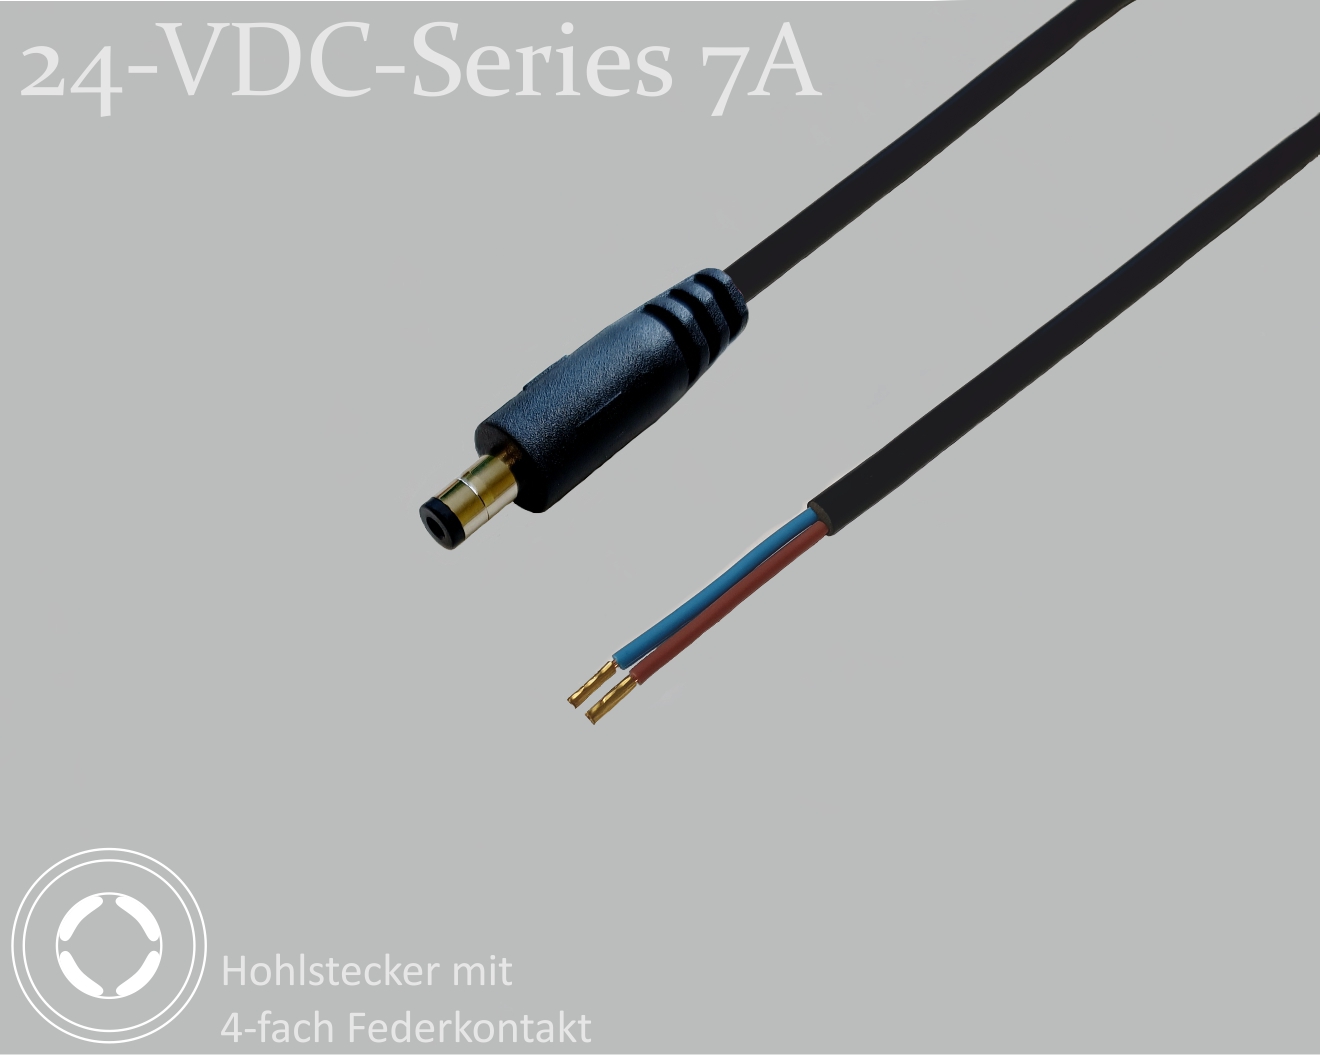 24-VDC-Series 7A, DC connection cable, DC plug with 4-spring contact 2.1x5.5x9.5mm, round cable 2x0.50mm², black, wire end sleeves, 0.75m